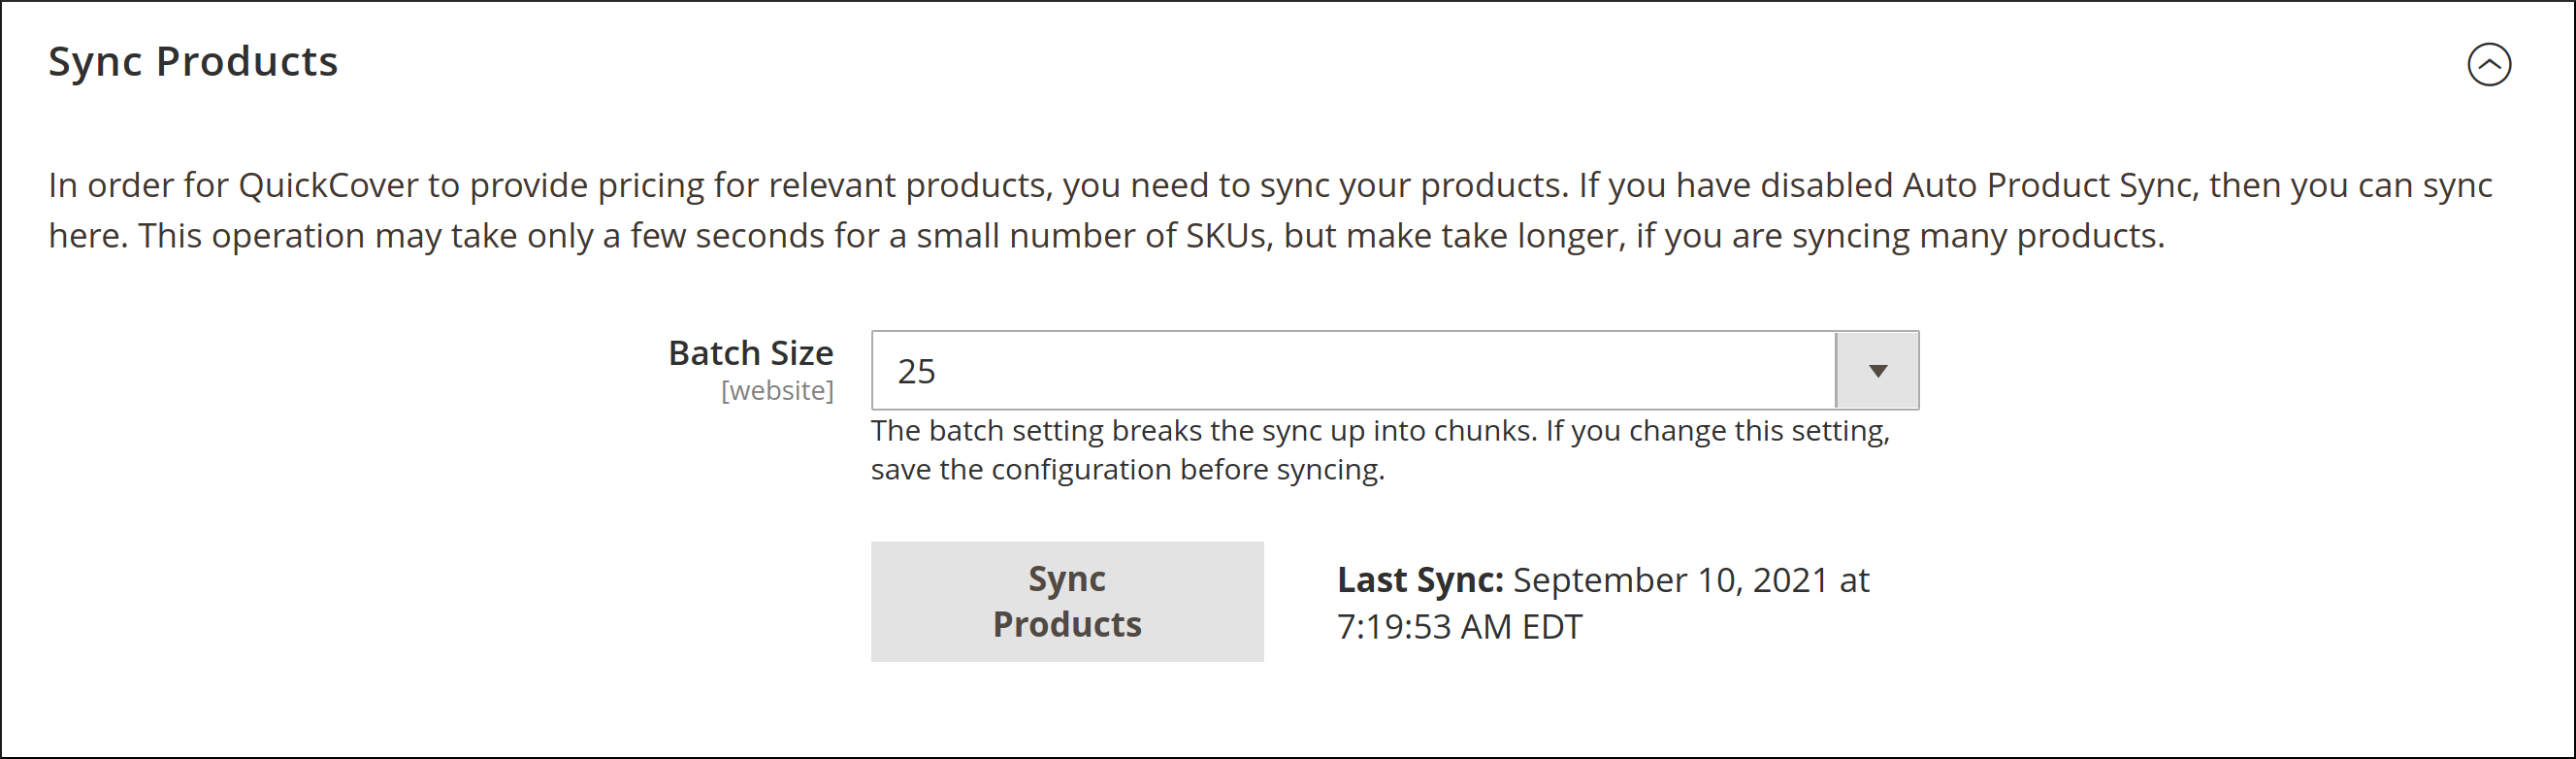 Image of the configuration screen that shows the sync control. It has a setting for how many records to sync at a time and a button that initiates the sync